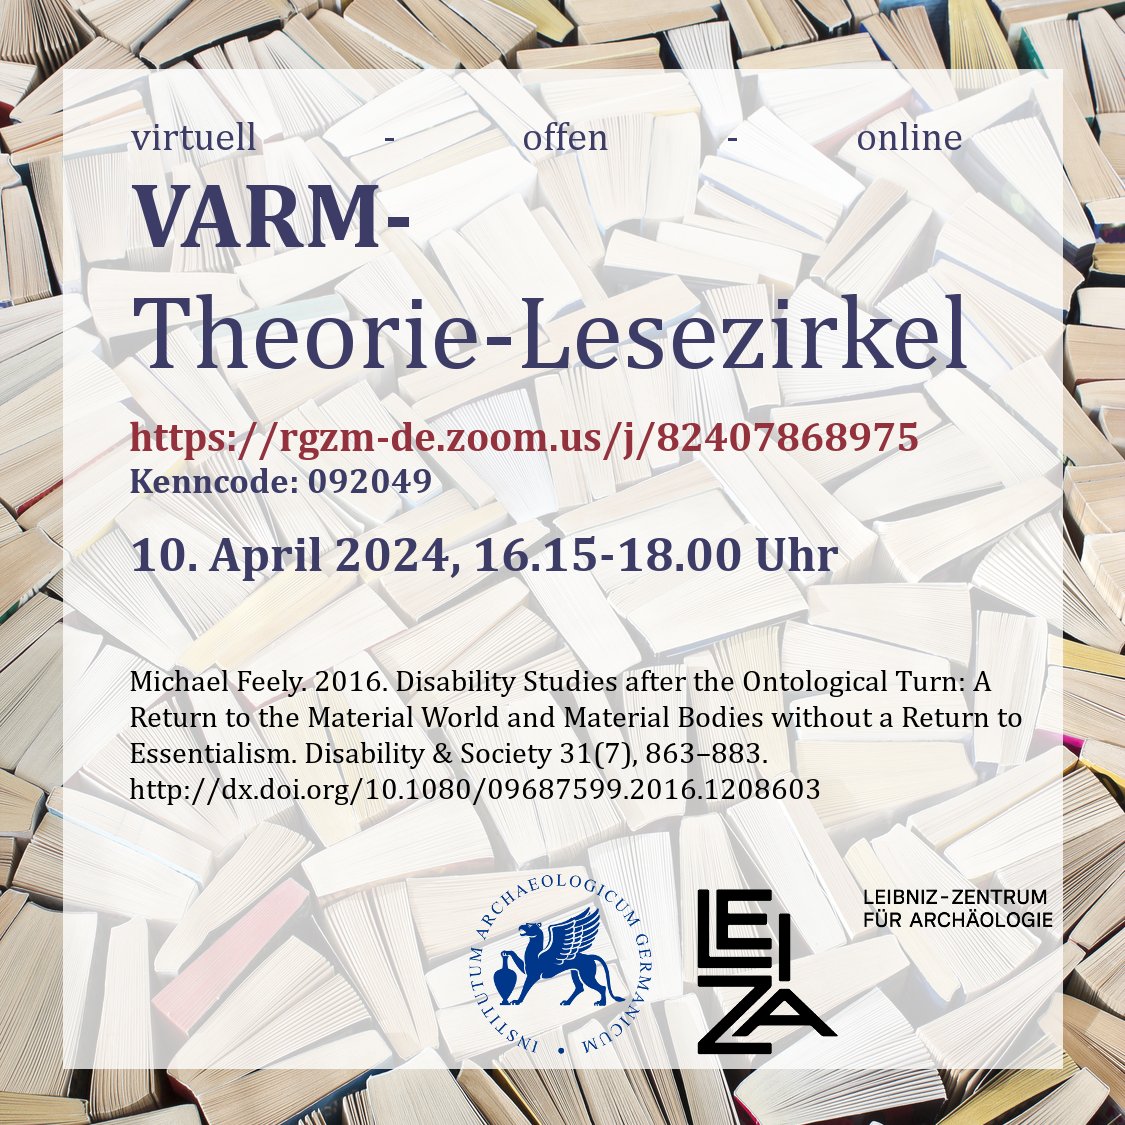 Join our #reading #circle on theoretical #archaeology. In spring, we will be focussing on the topic of 'Dis/abled Bodies'. 📅 10 April, 4.15 pm (online via zoom) 👉 more info: varm.hypotheses.org/2512 #LEIZA #LEIZArchaology #Discussion #Theory